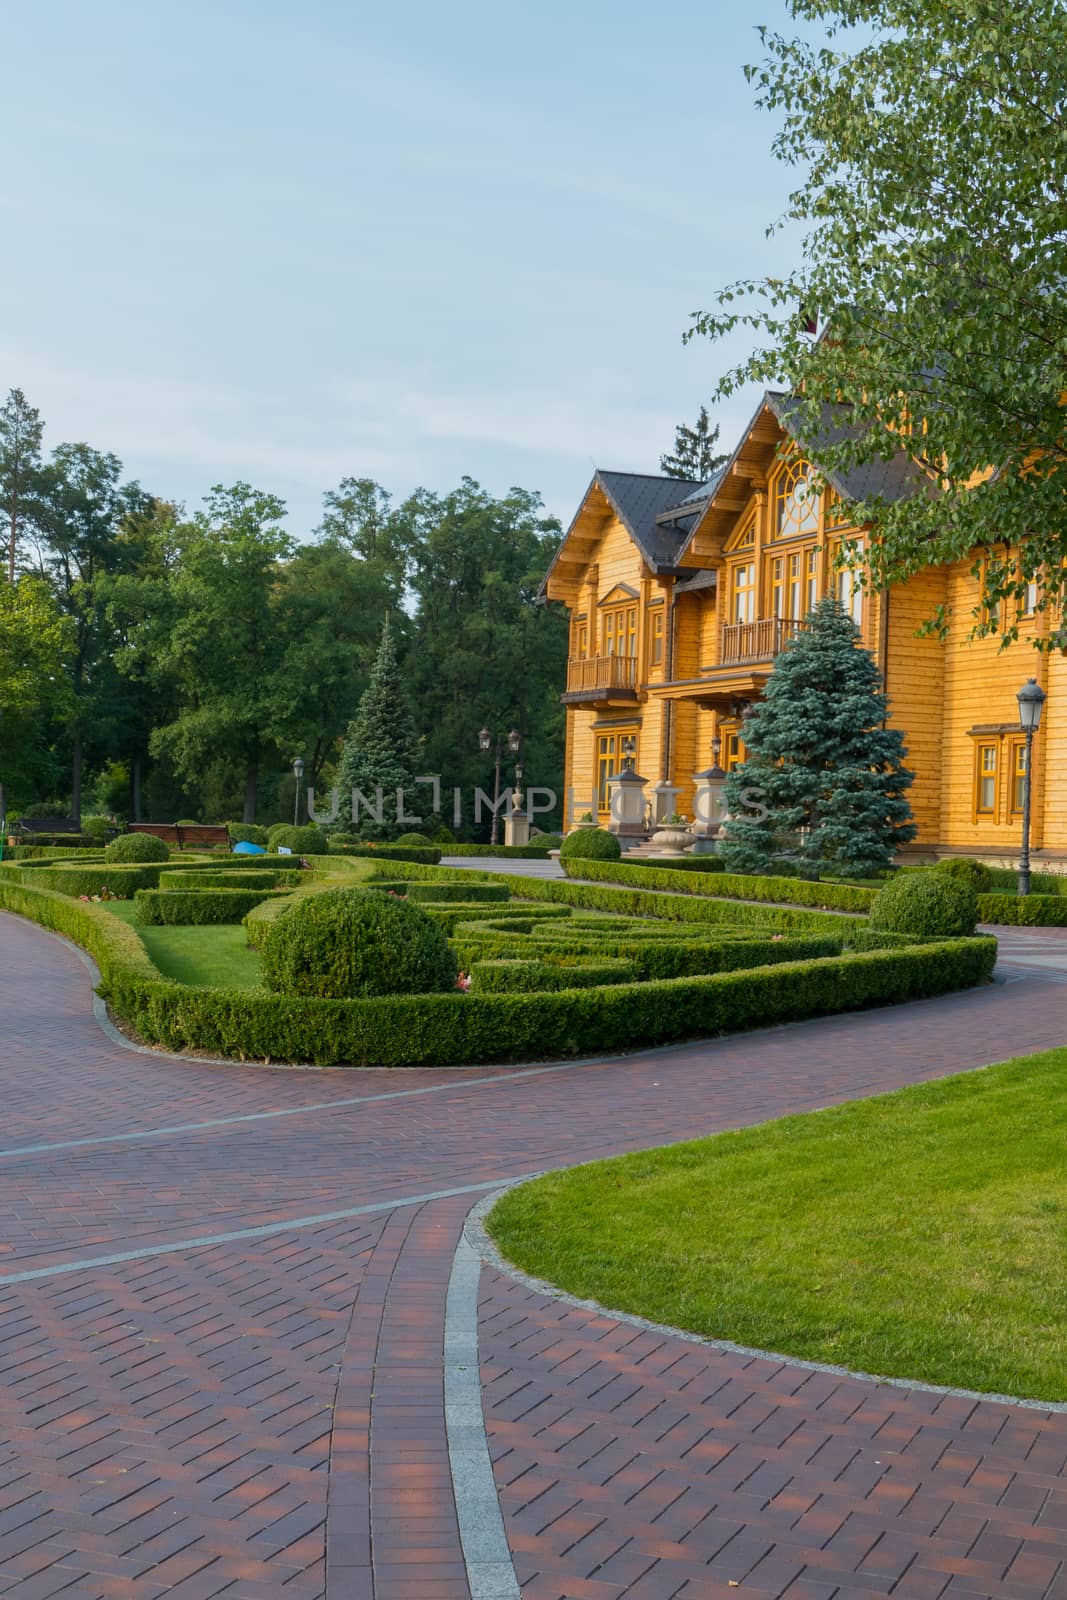 Ornaments made from shaved boxwood bushes on a lawn in front of a wooden house. Mezhygirya Ukraine by Adamchuk